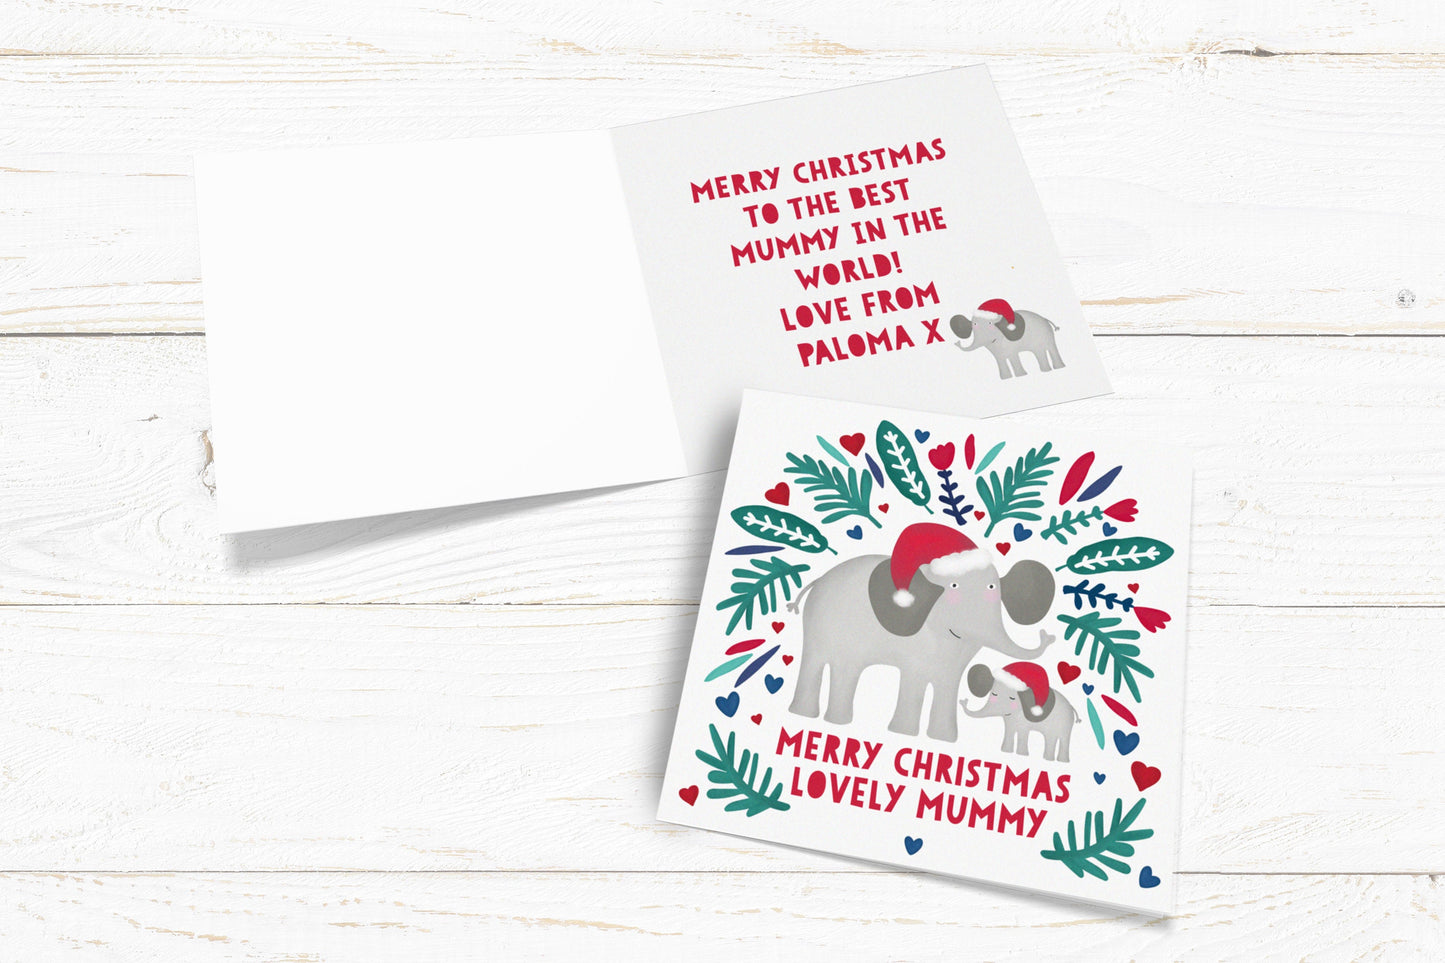 Merry Christmas Cute Elephant Card. Personalise for Daddy, Mummy, Grandpa, Granny etc. Personalised Christmas Card. Send Direct Option.